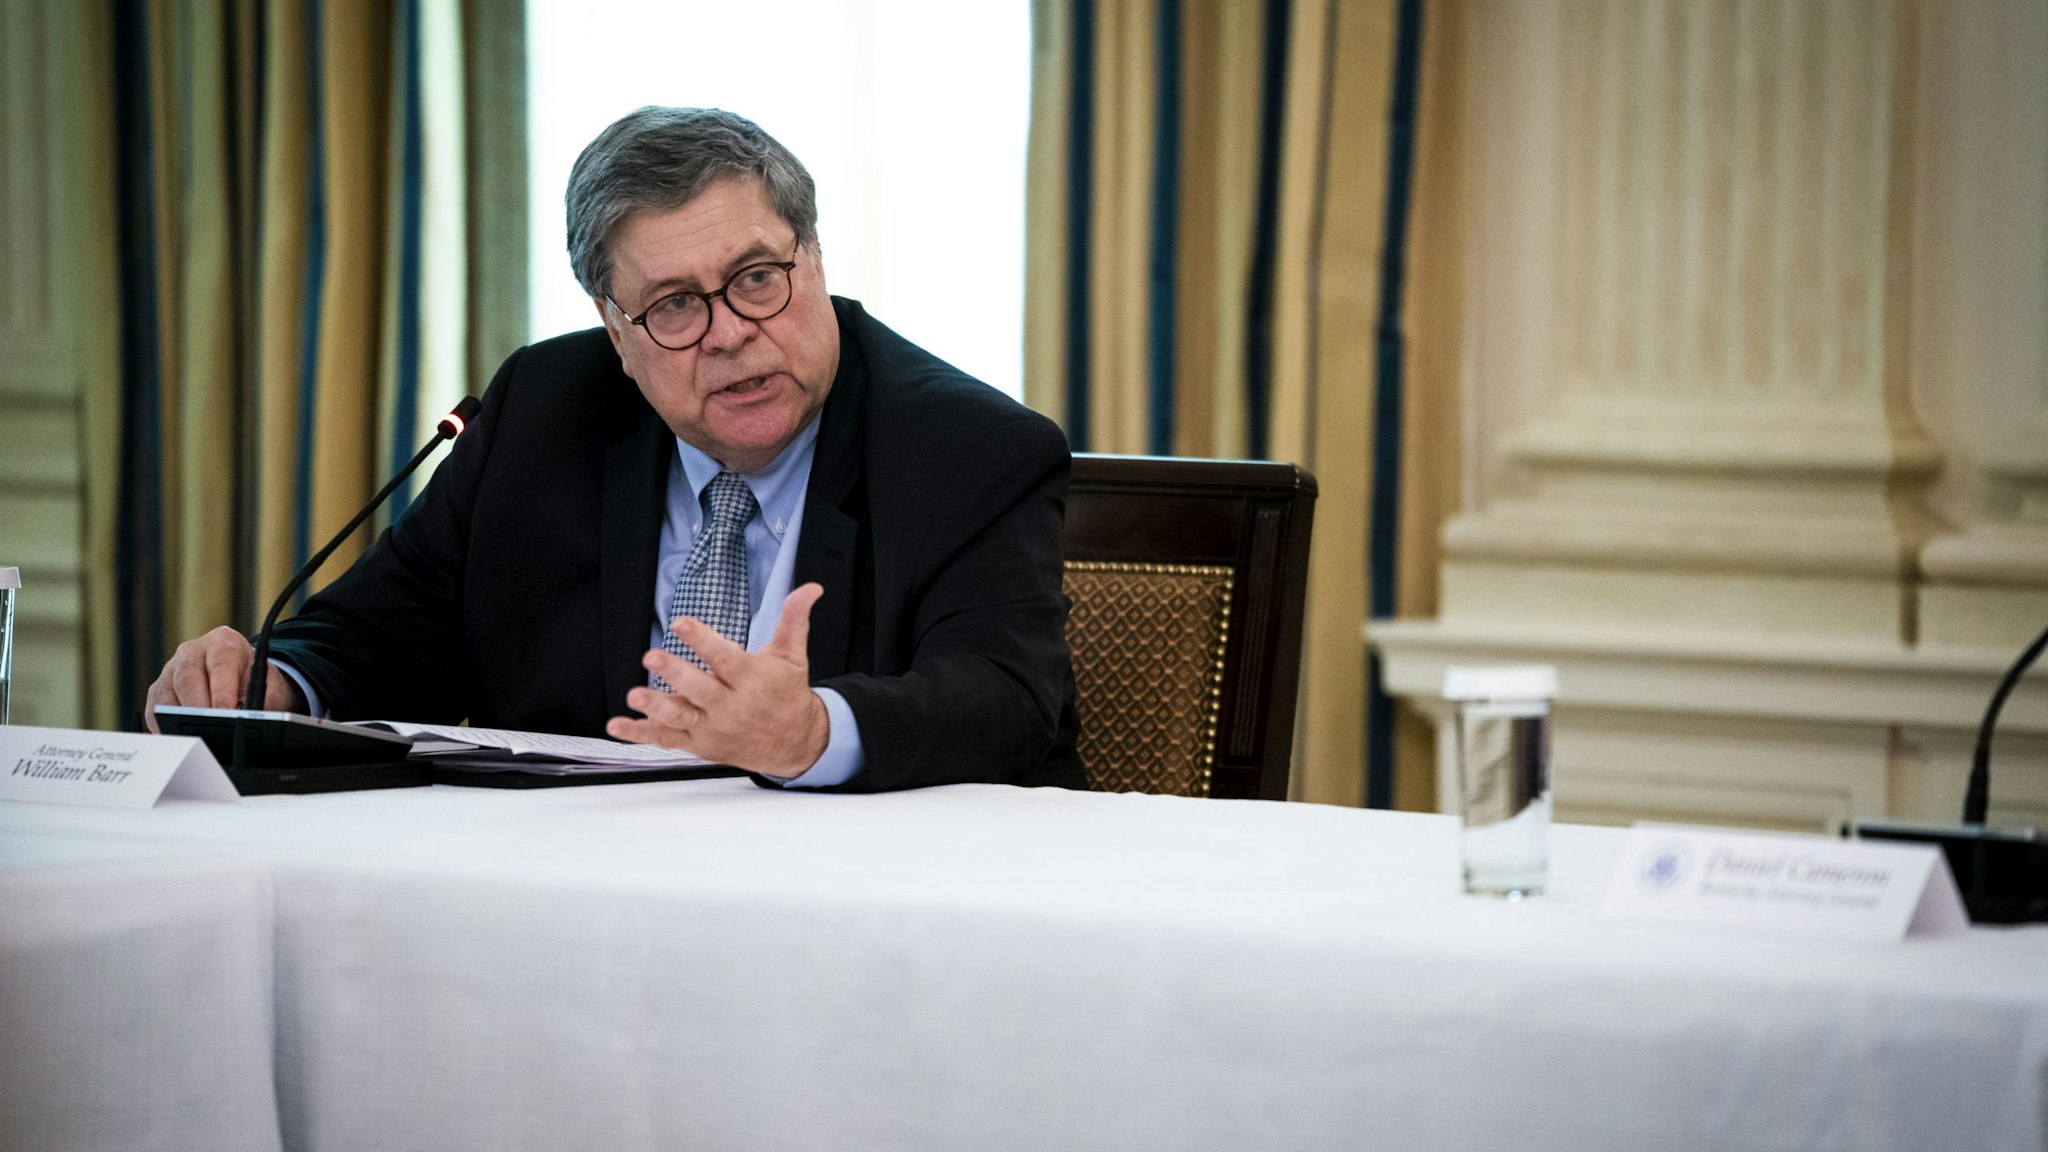 WASHINGTON, DC - JUNE 08: Attorney General William Barr speaks during in a roundtable with law enforcement officials in the State Dining Room of the White House, June, 8, 2020 in Washington, DC. (Photo by Doug Mills-Pool/Getty Images)